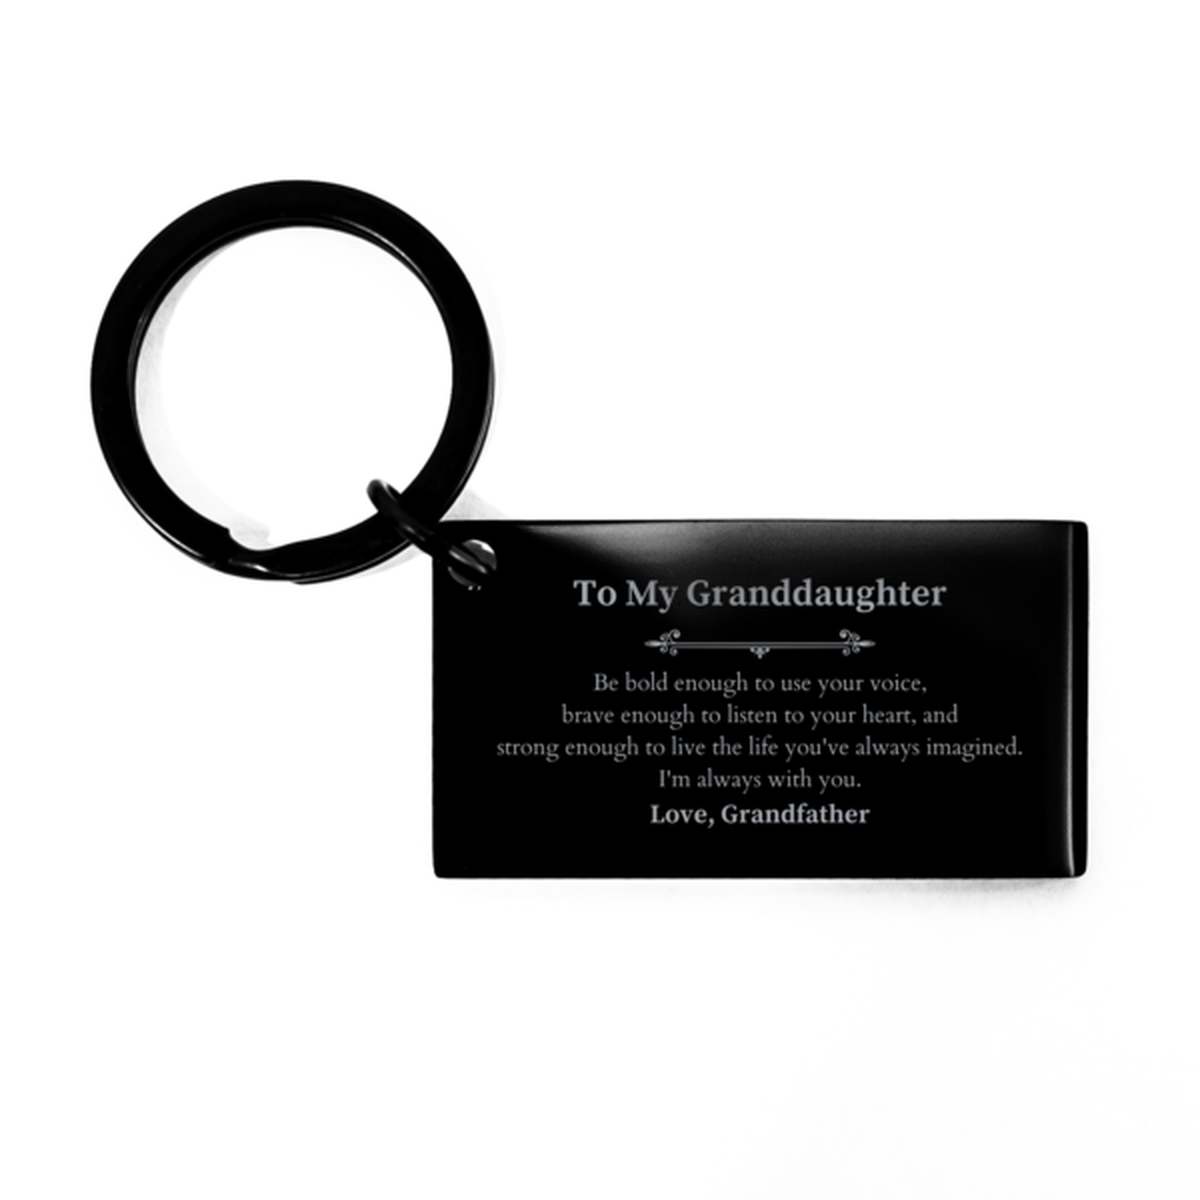 Keepsake Granddaughter Keychain Gift Idea Graduation Christmas Birthday Granddaughter from Grandfather, Granddaughter Be bold enough to use your voice, brave enough to listen to your heart. Love, Grandfather